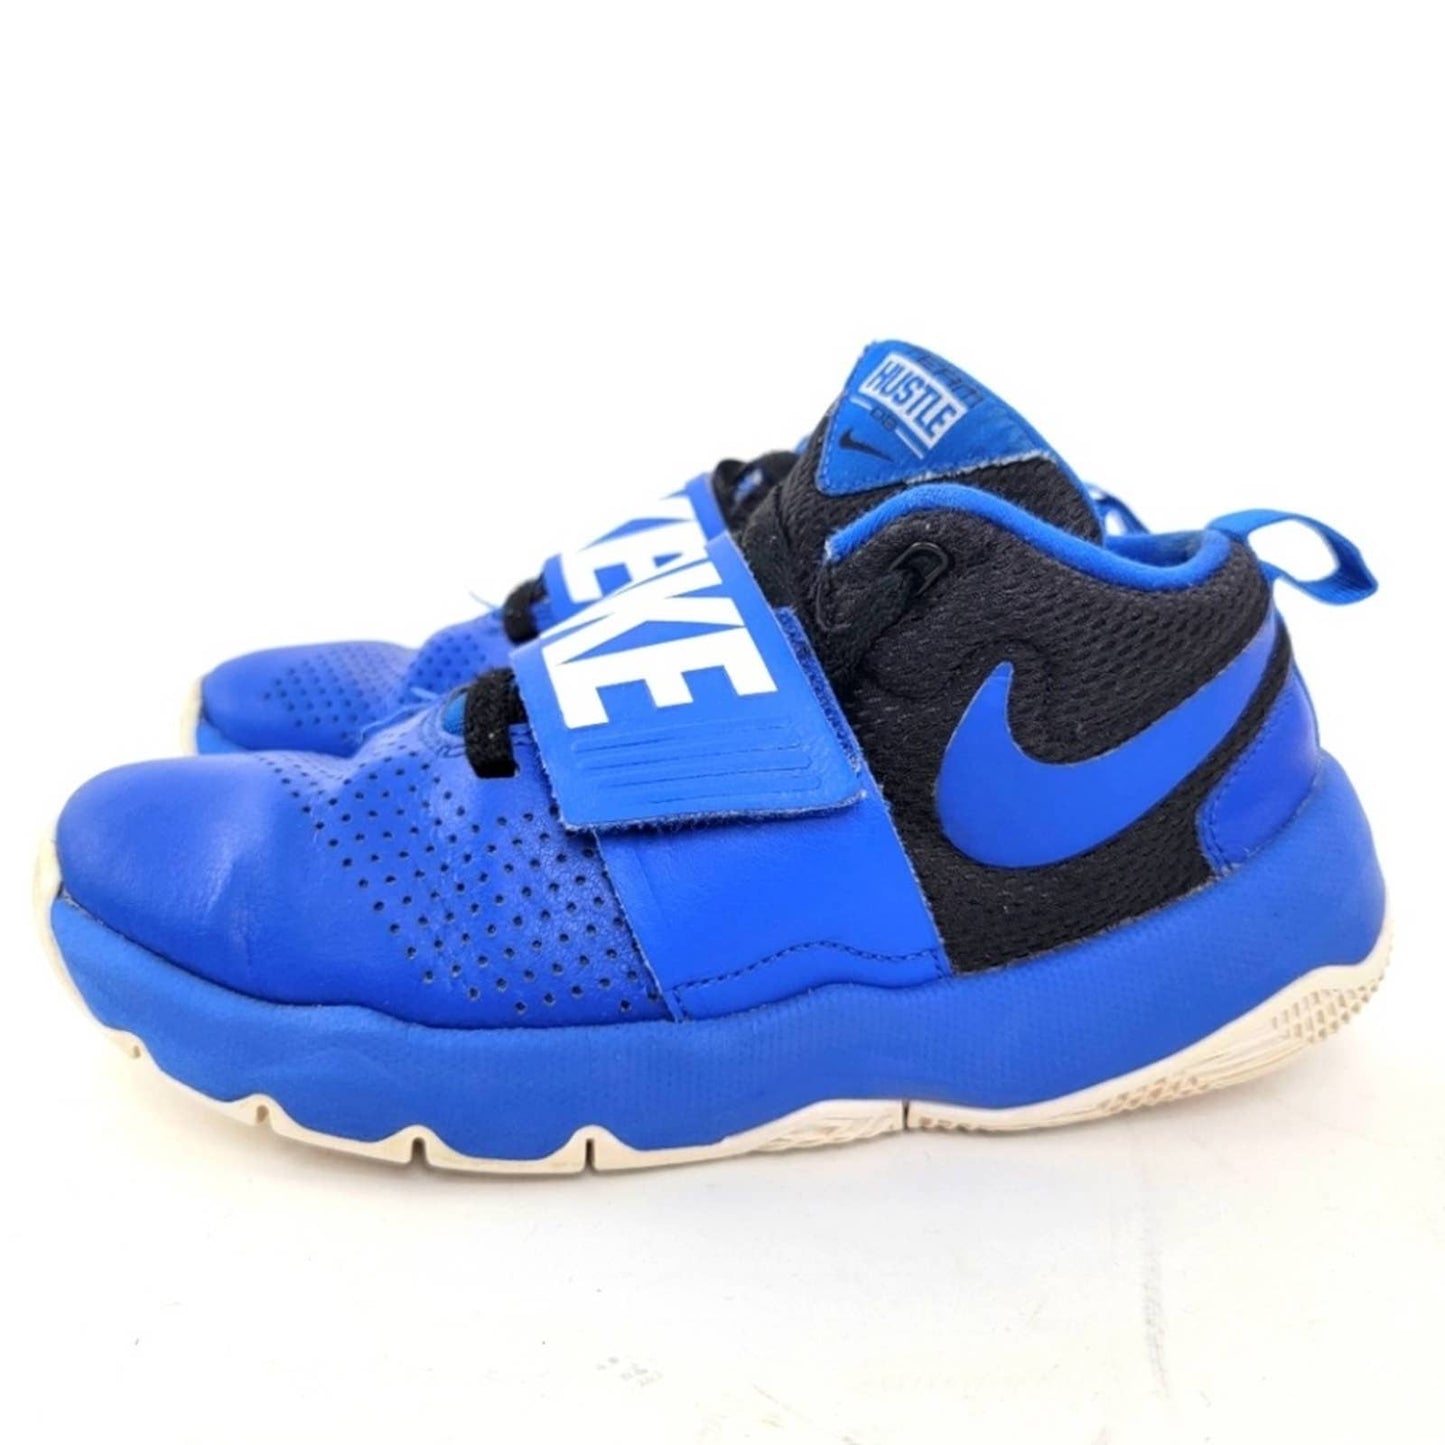 Nike Team Hustle D 8 (GS) Youth Athletic Shoes - 4Y